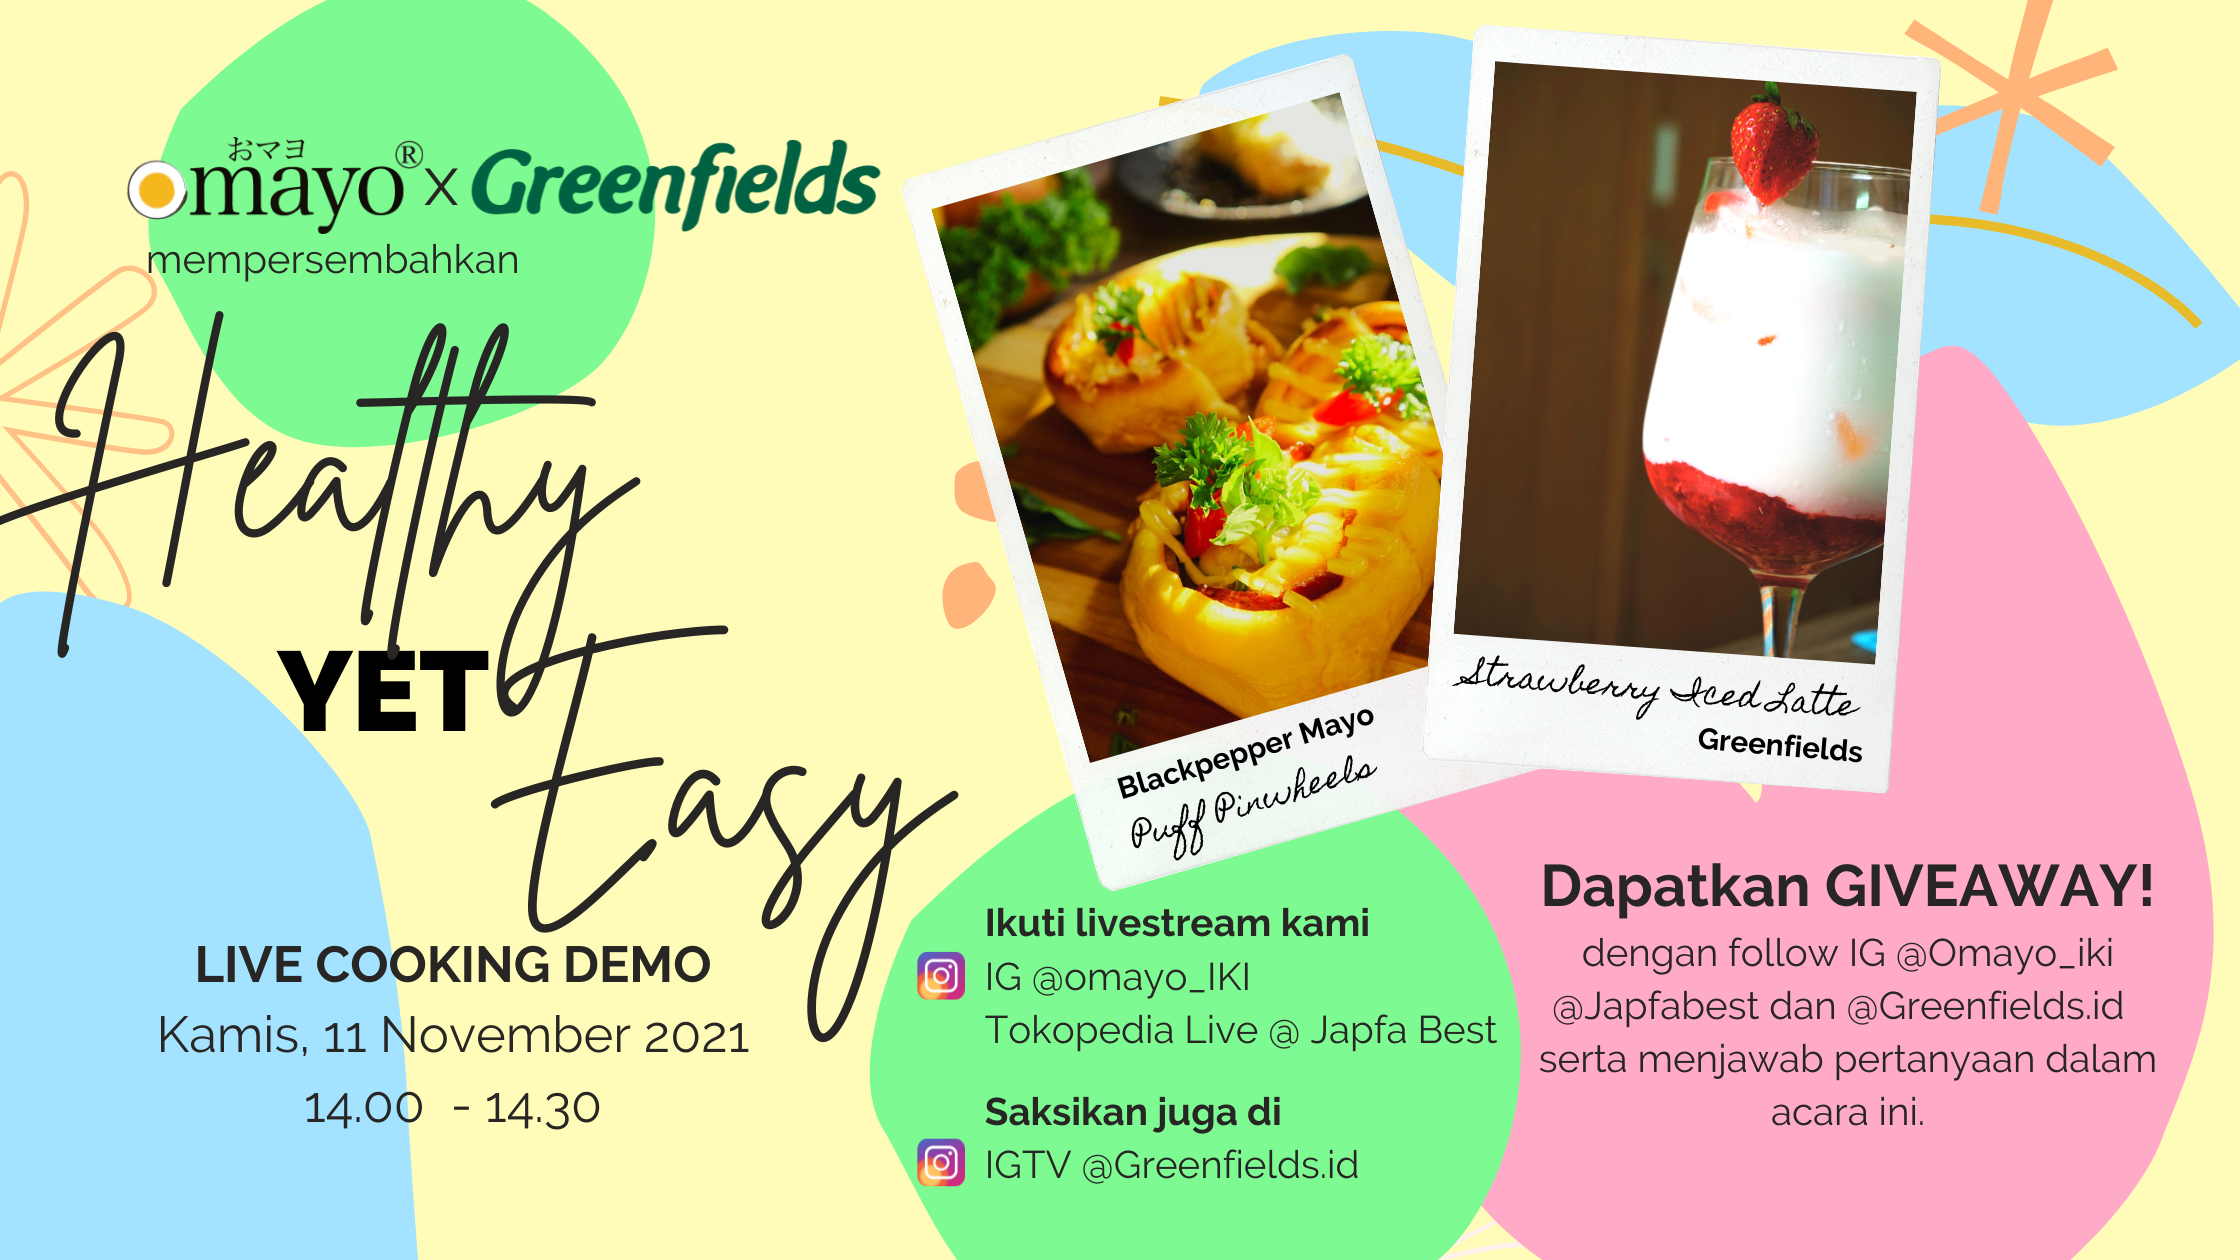 Live Cooking Demo Omayo x Greenfields